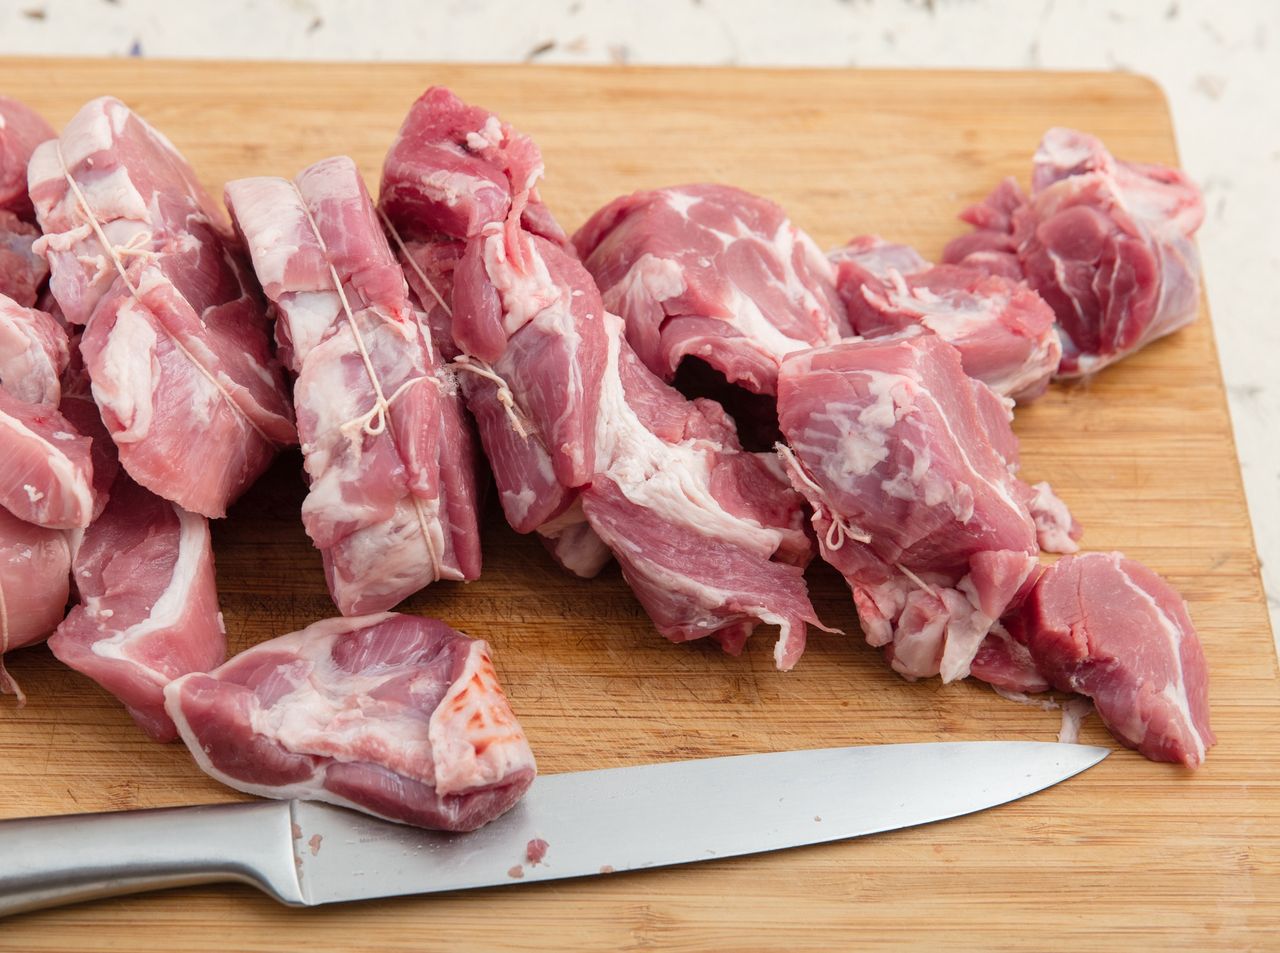 How to properly cut meat?